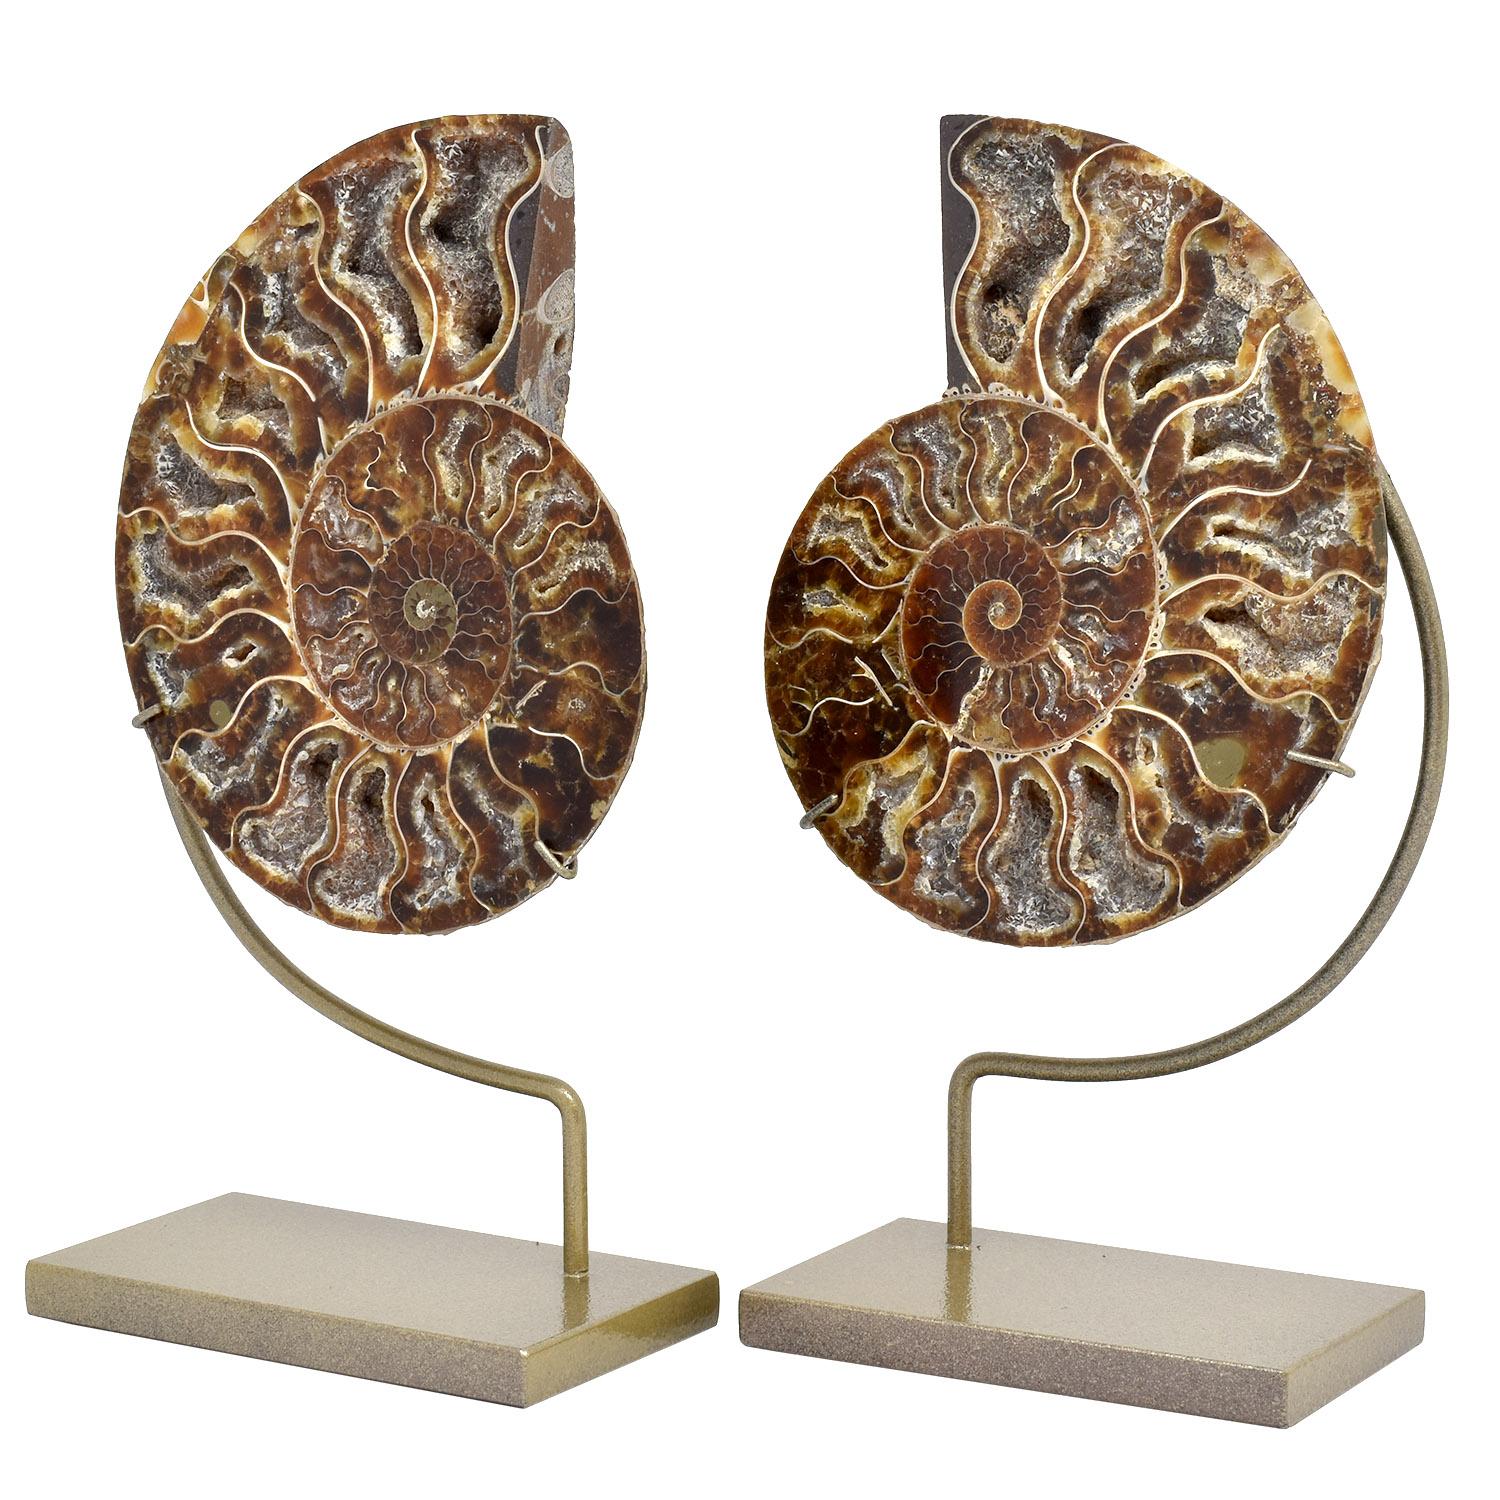 Medium split ammonite fossil mineral specimen custom mounted Cretaceous period.

An excellent quality split ammonite fossil. We hand pick each set of split ammonites, looking for minimal matrix filled chambers as the chambers filled with crystals